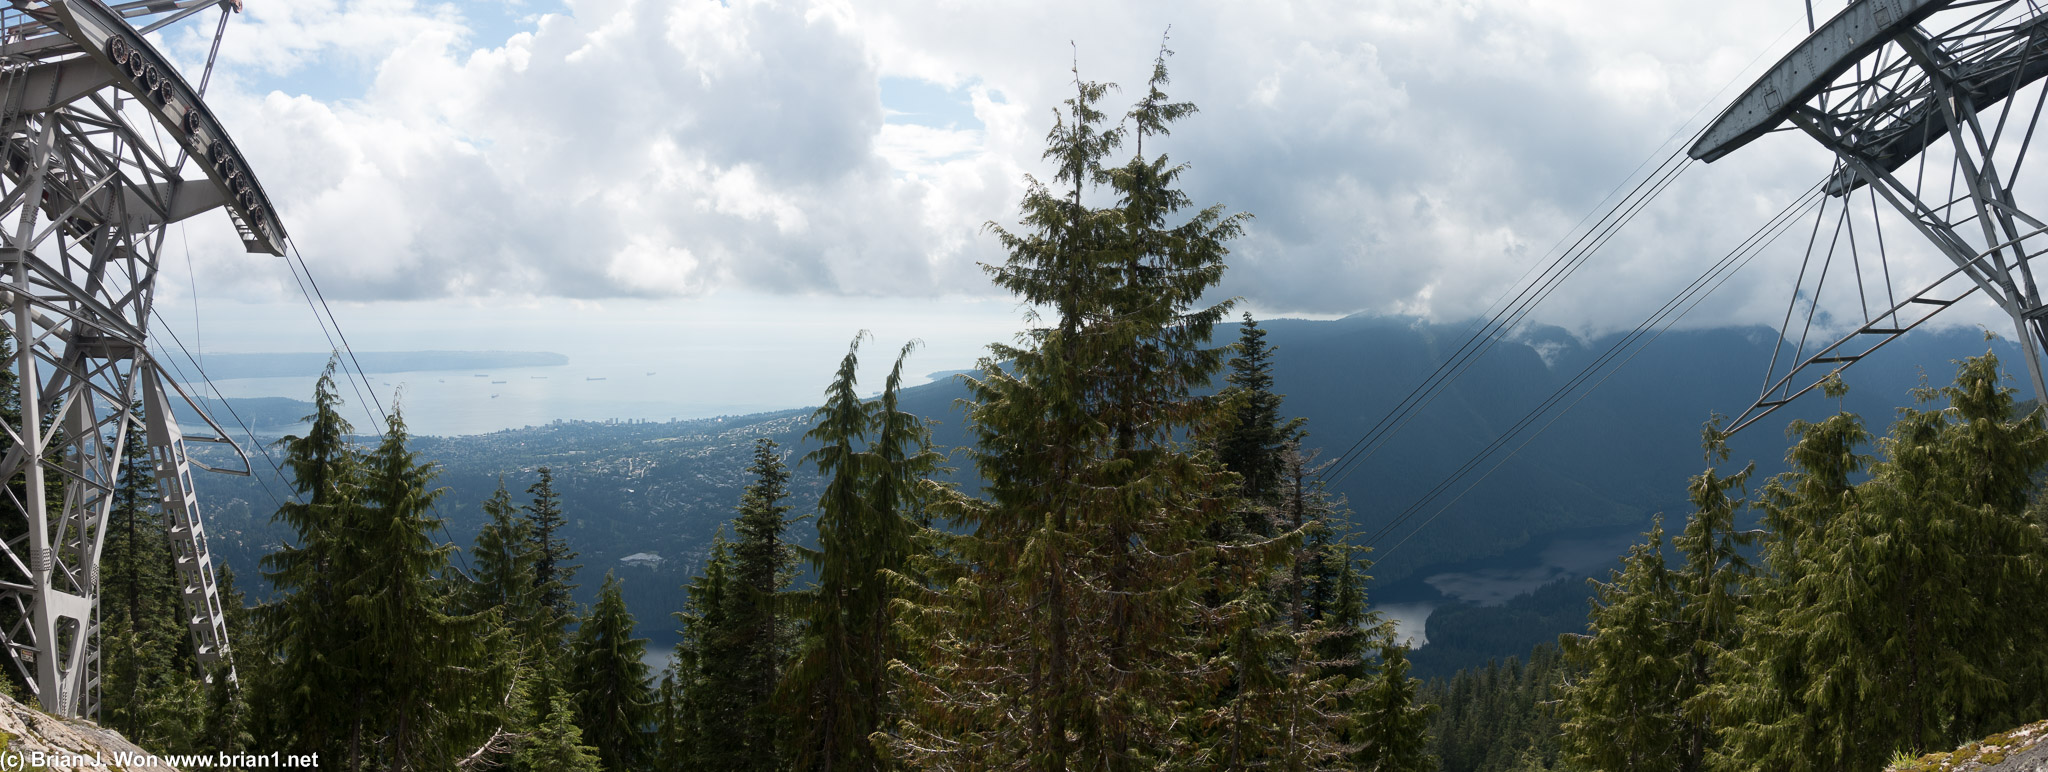 The top of Grouse Mountain.